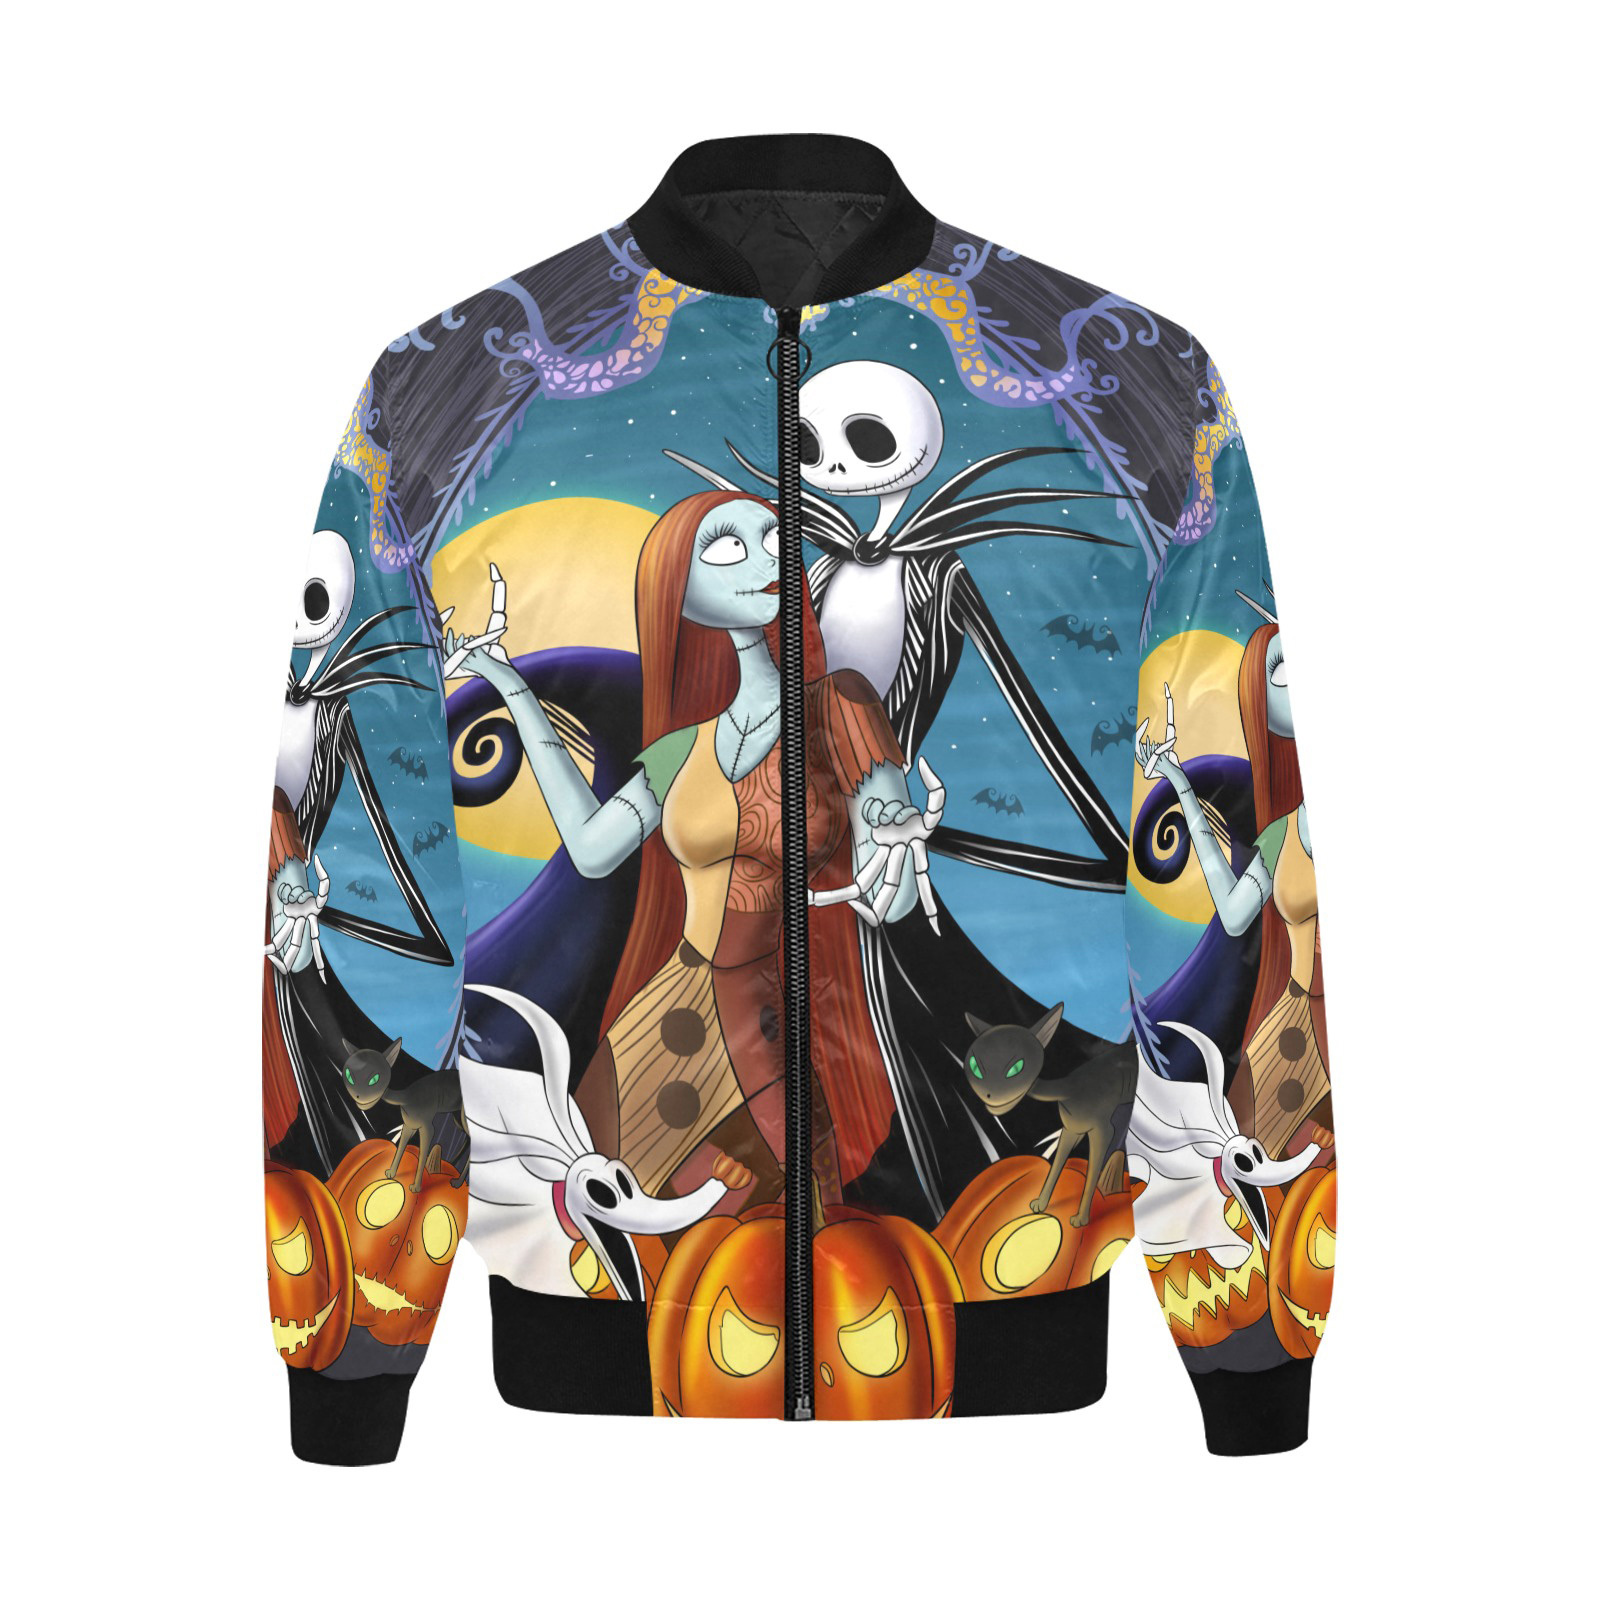 Primary image for Jack and Sally Bomber Jacket Adult and Kids 